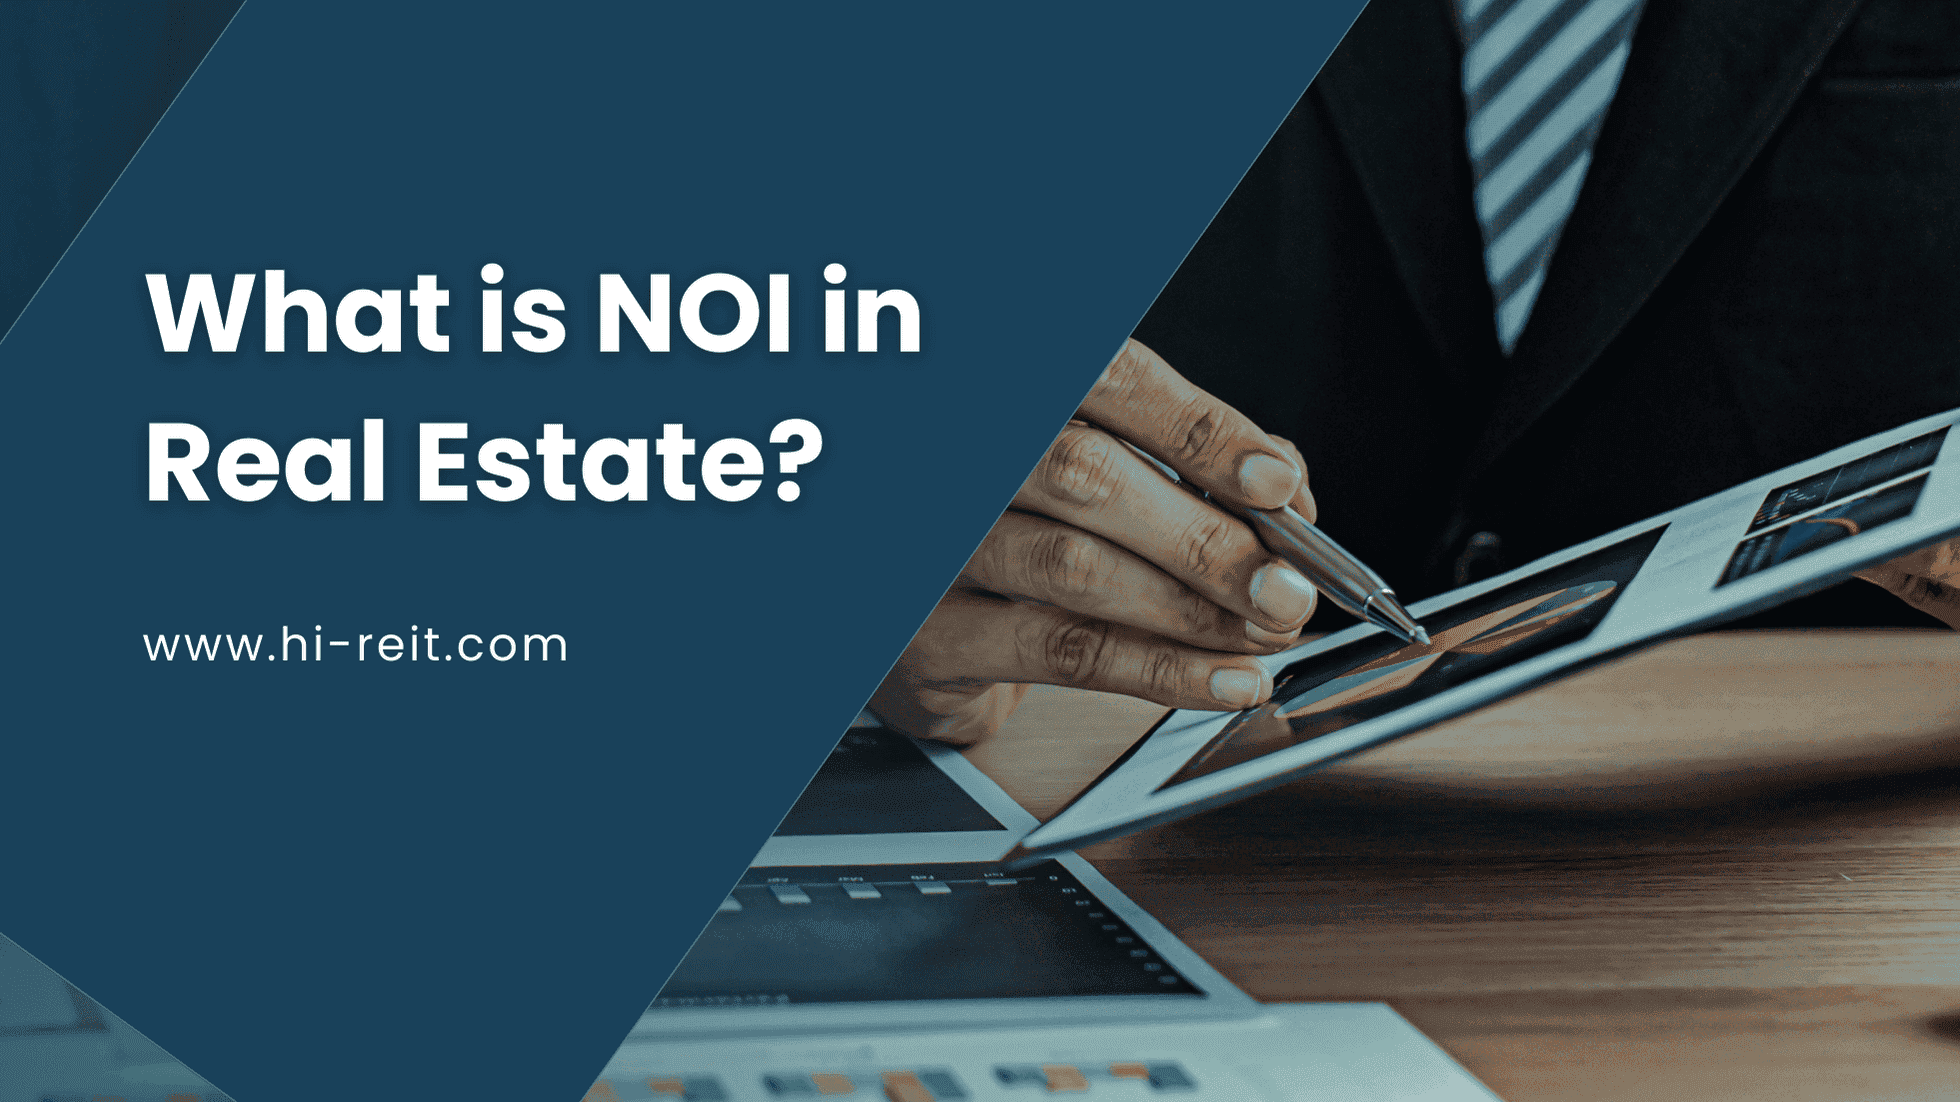 What is NOI in Real Estate?